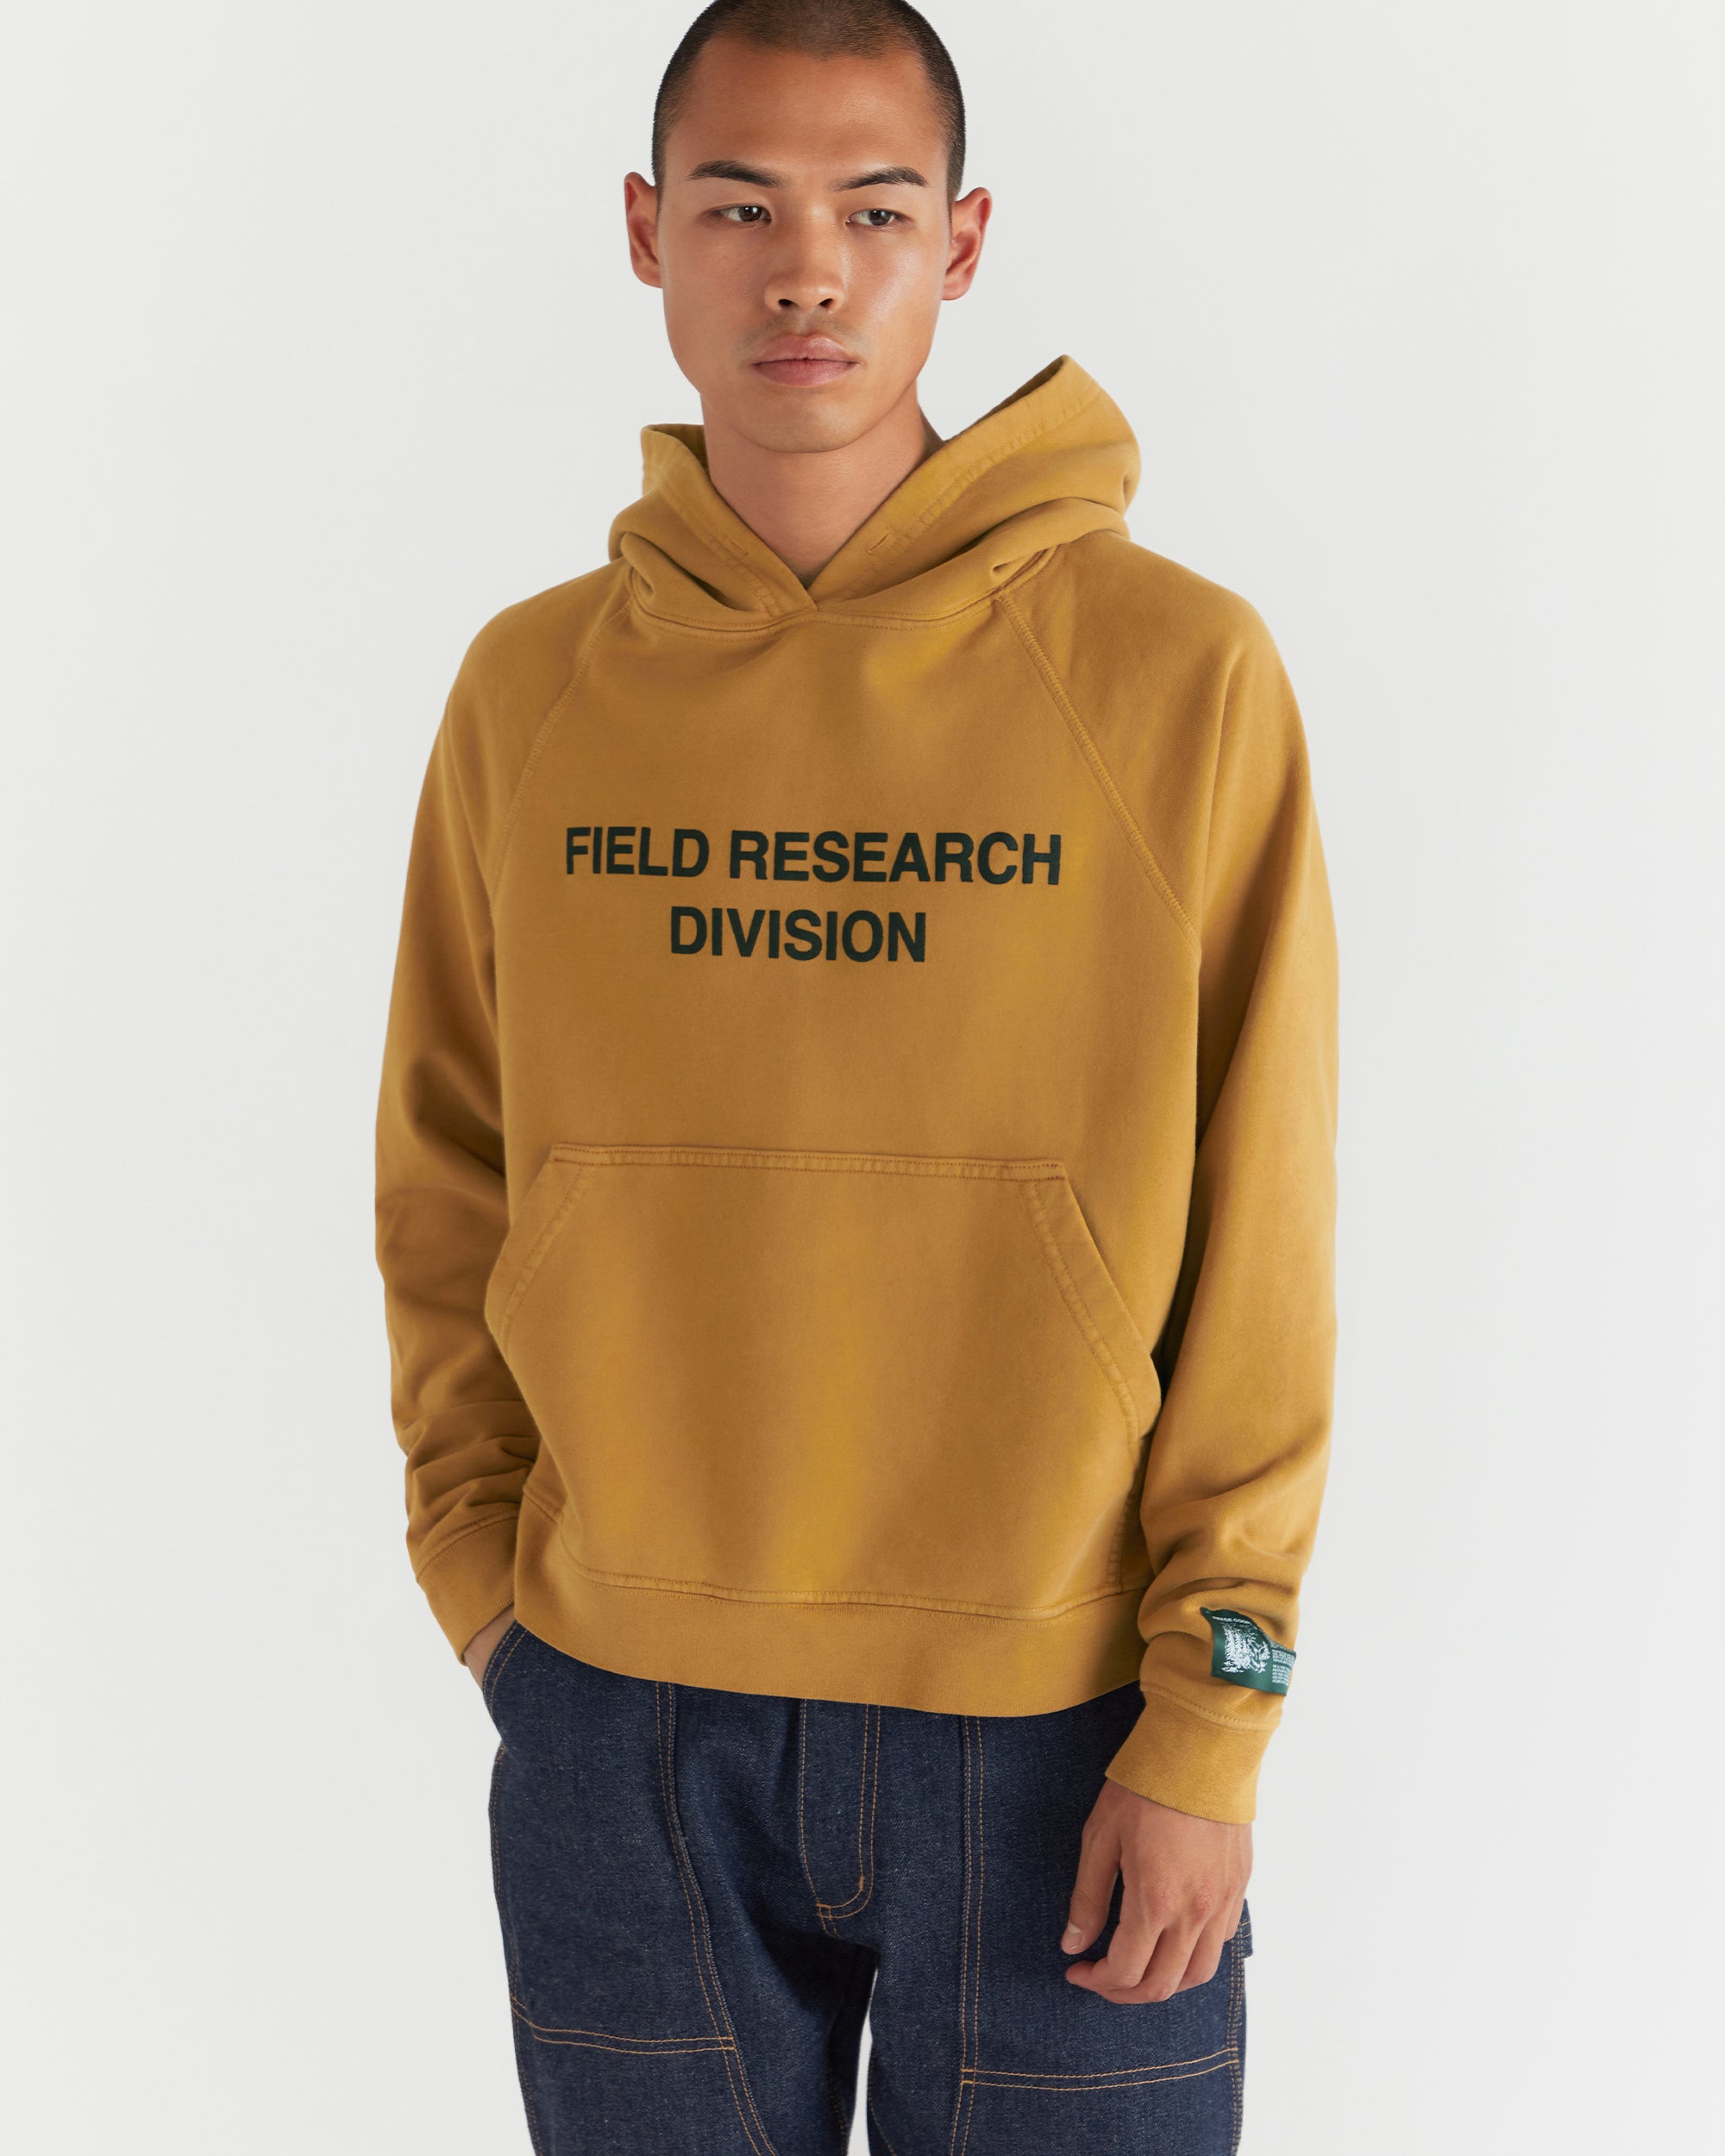 Men - Field Research Division Hooded Sweatshirt - Yellow - 2